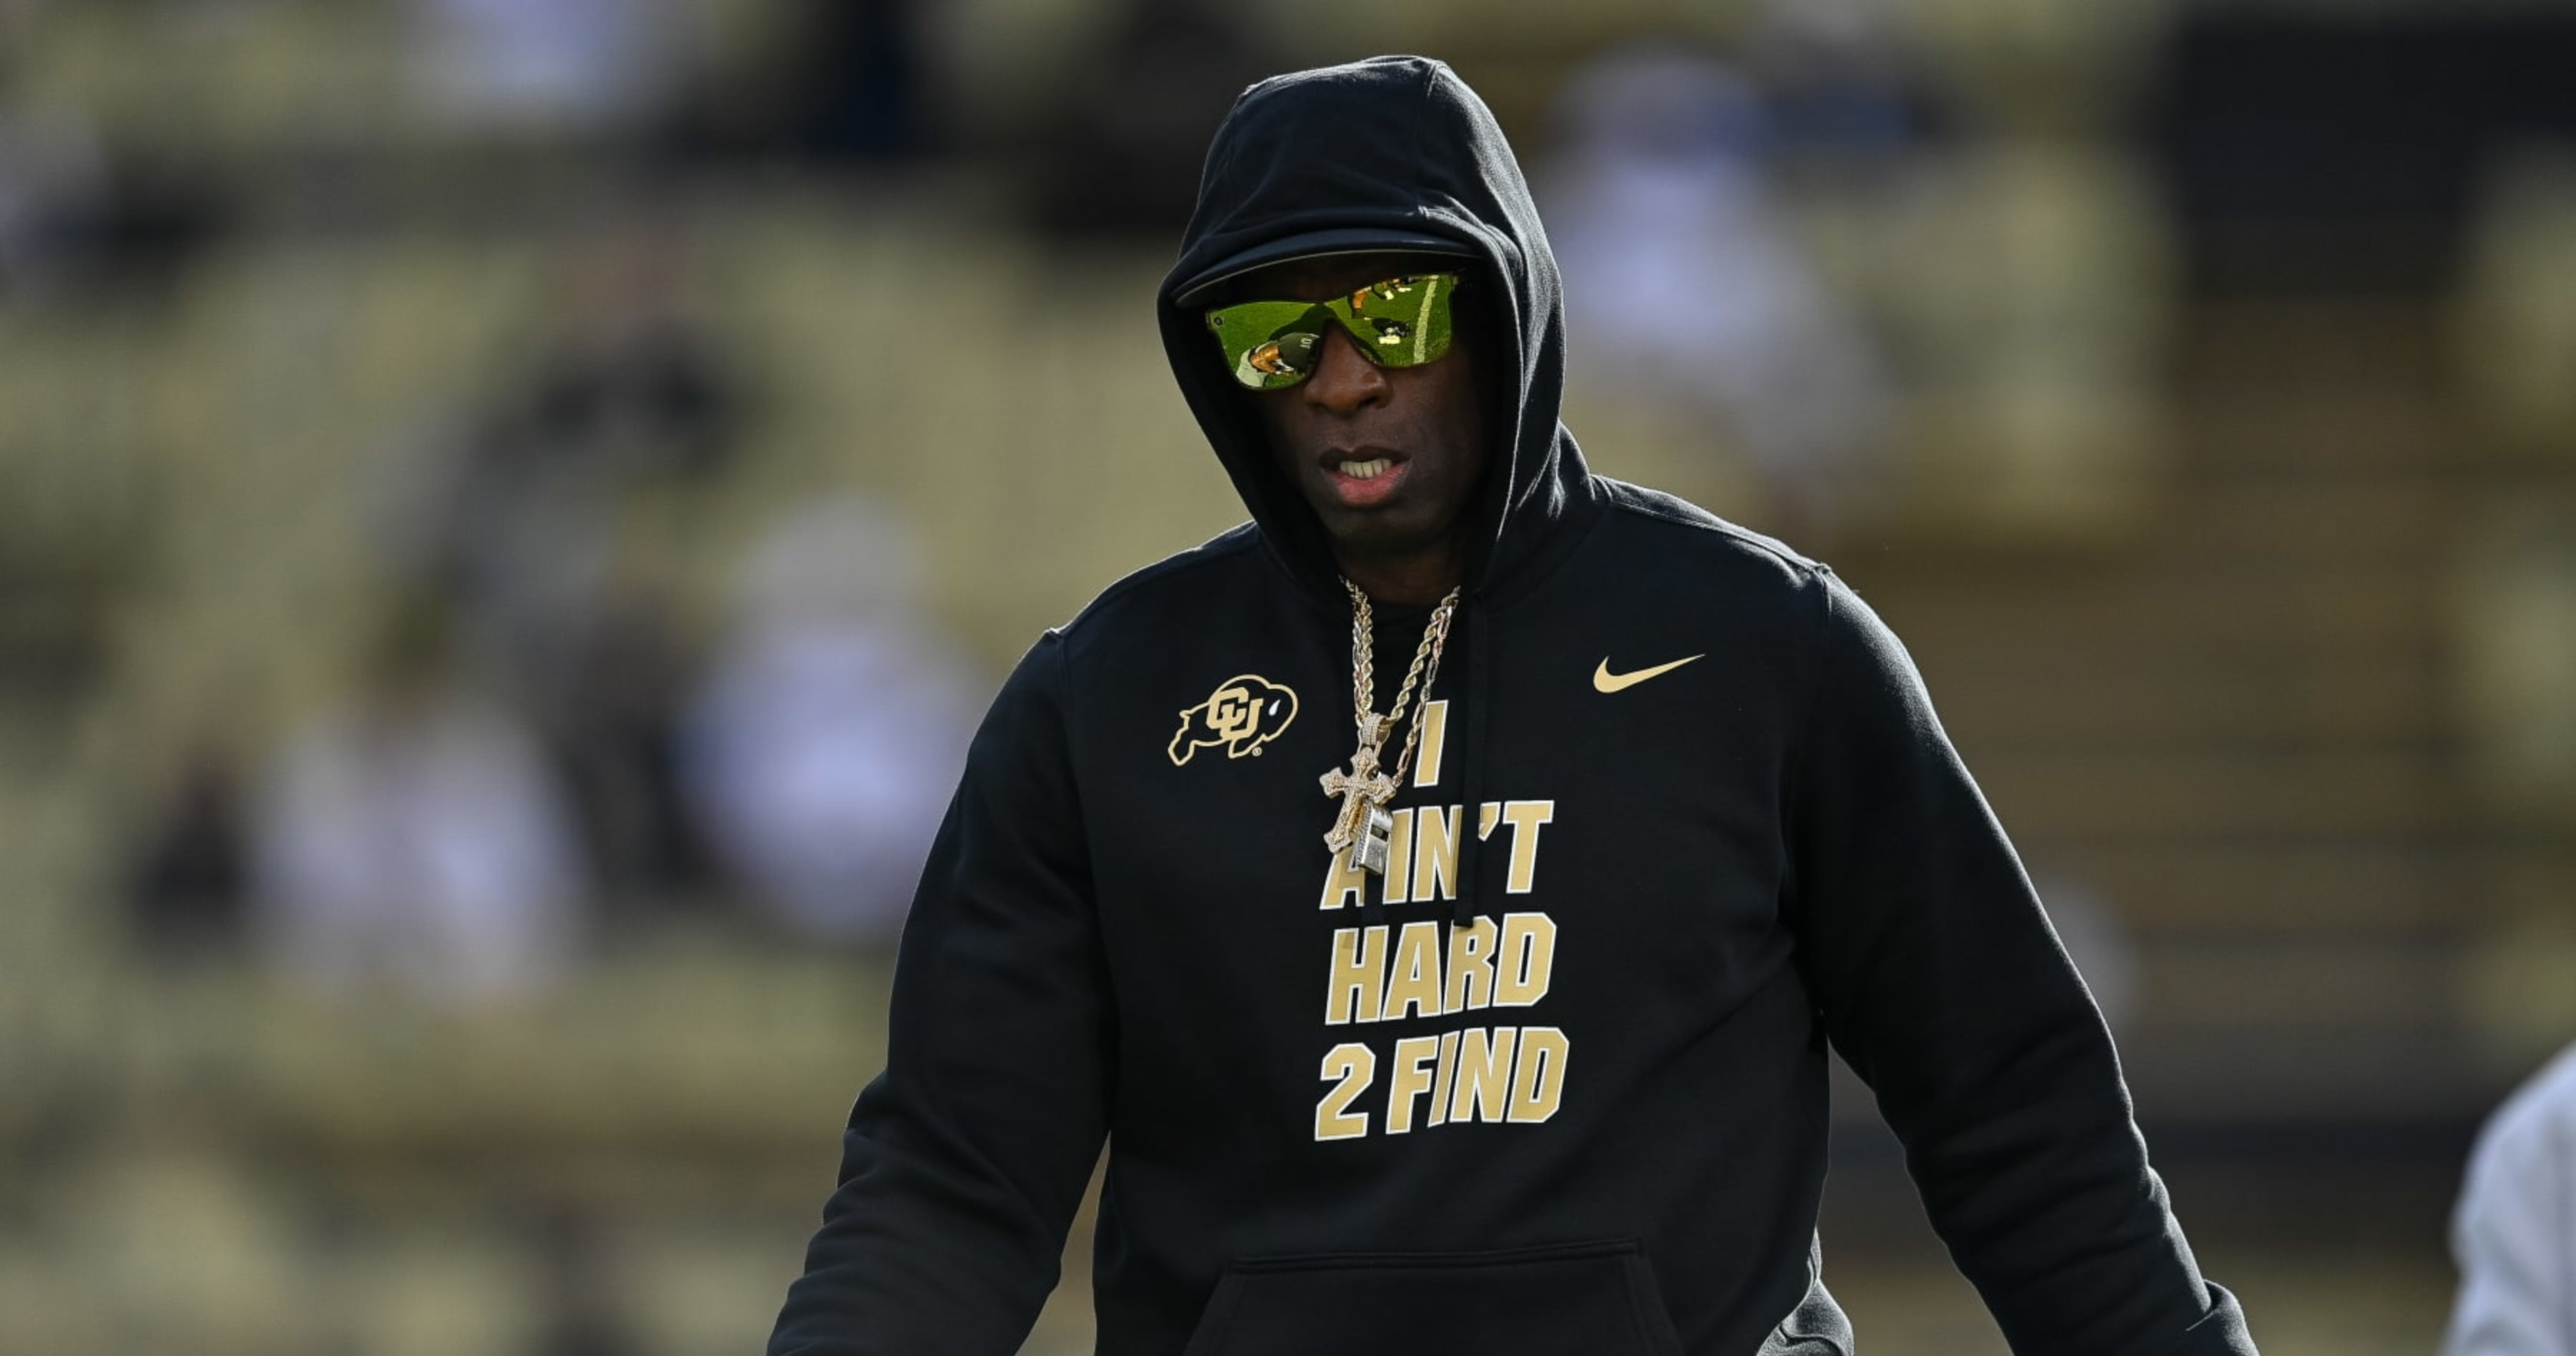 Colorado's Deion Sanders Files for New Trademarks, Including 'Give Me